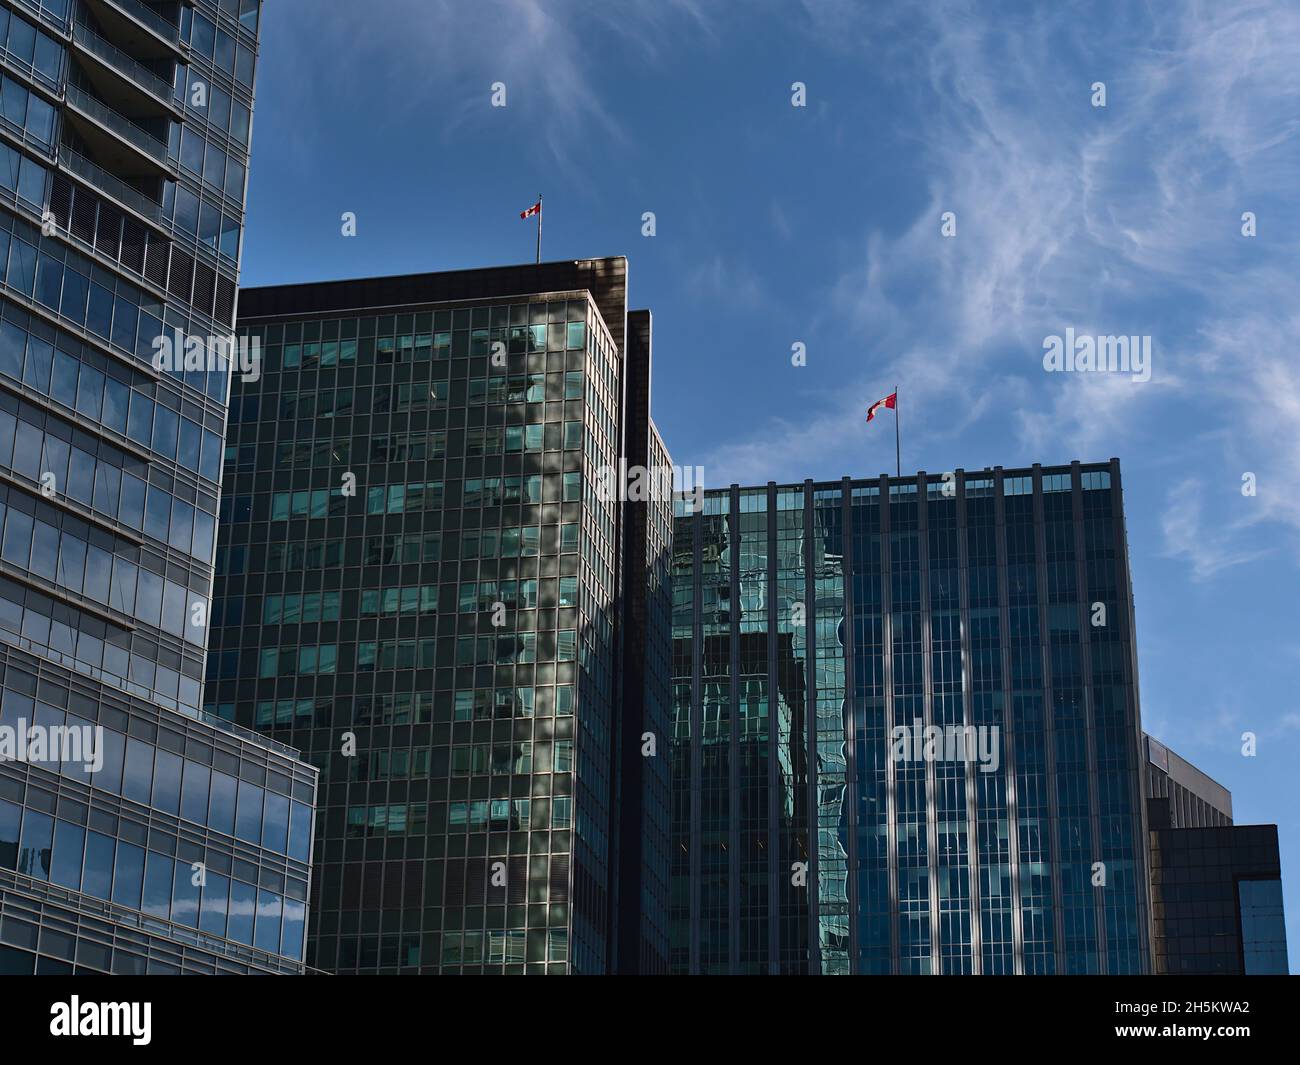 Low angle view of modern high-rise office buildings with glass facades and waving Canadian national flags in district Coal Harbour in Vancouver. Stock Photo